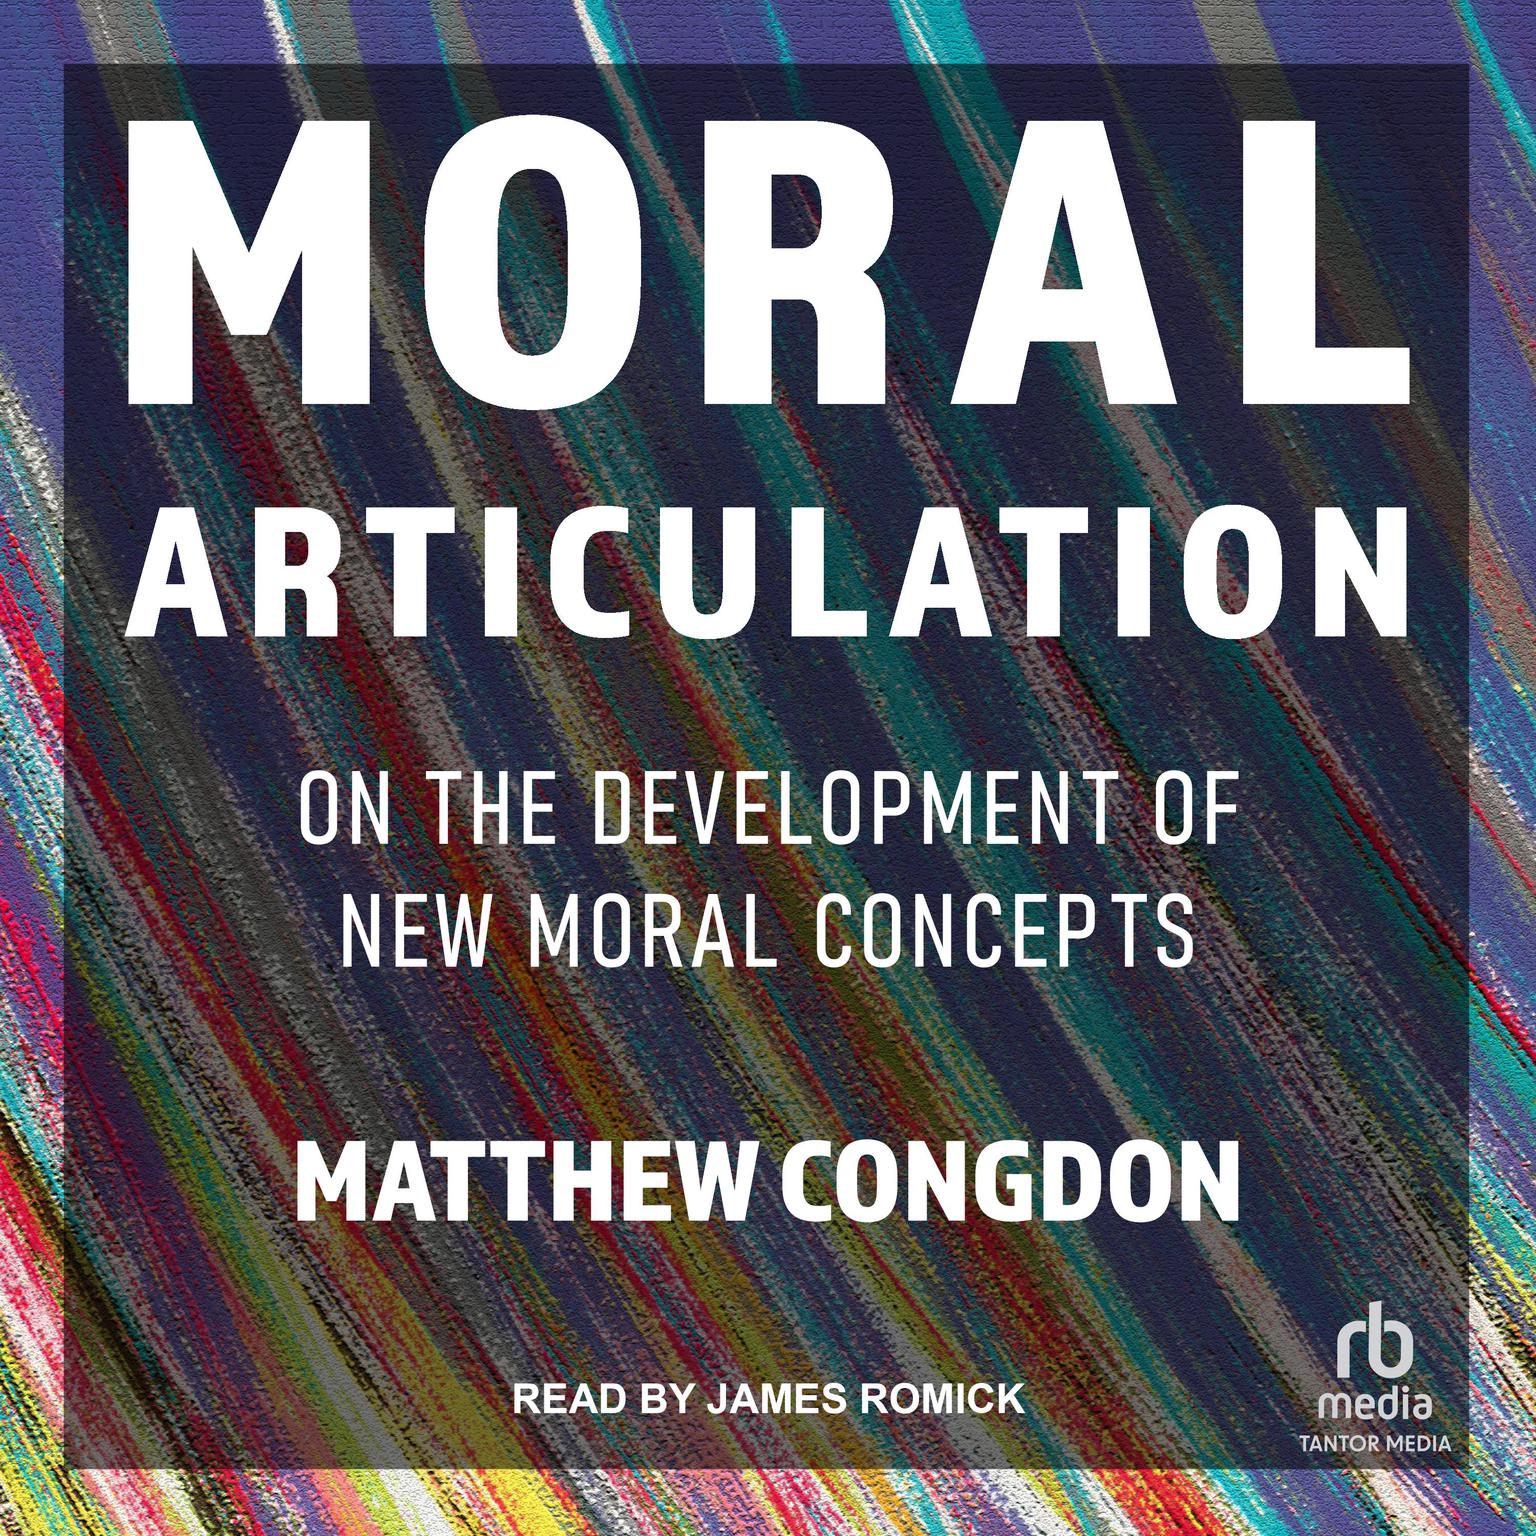 Moral Articulation: On the Development of New Moral Concepts Audiobook, by Matthew Congdon